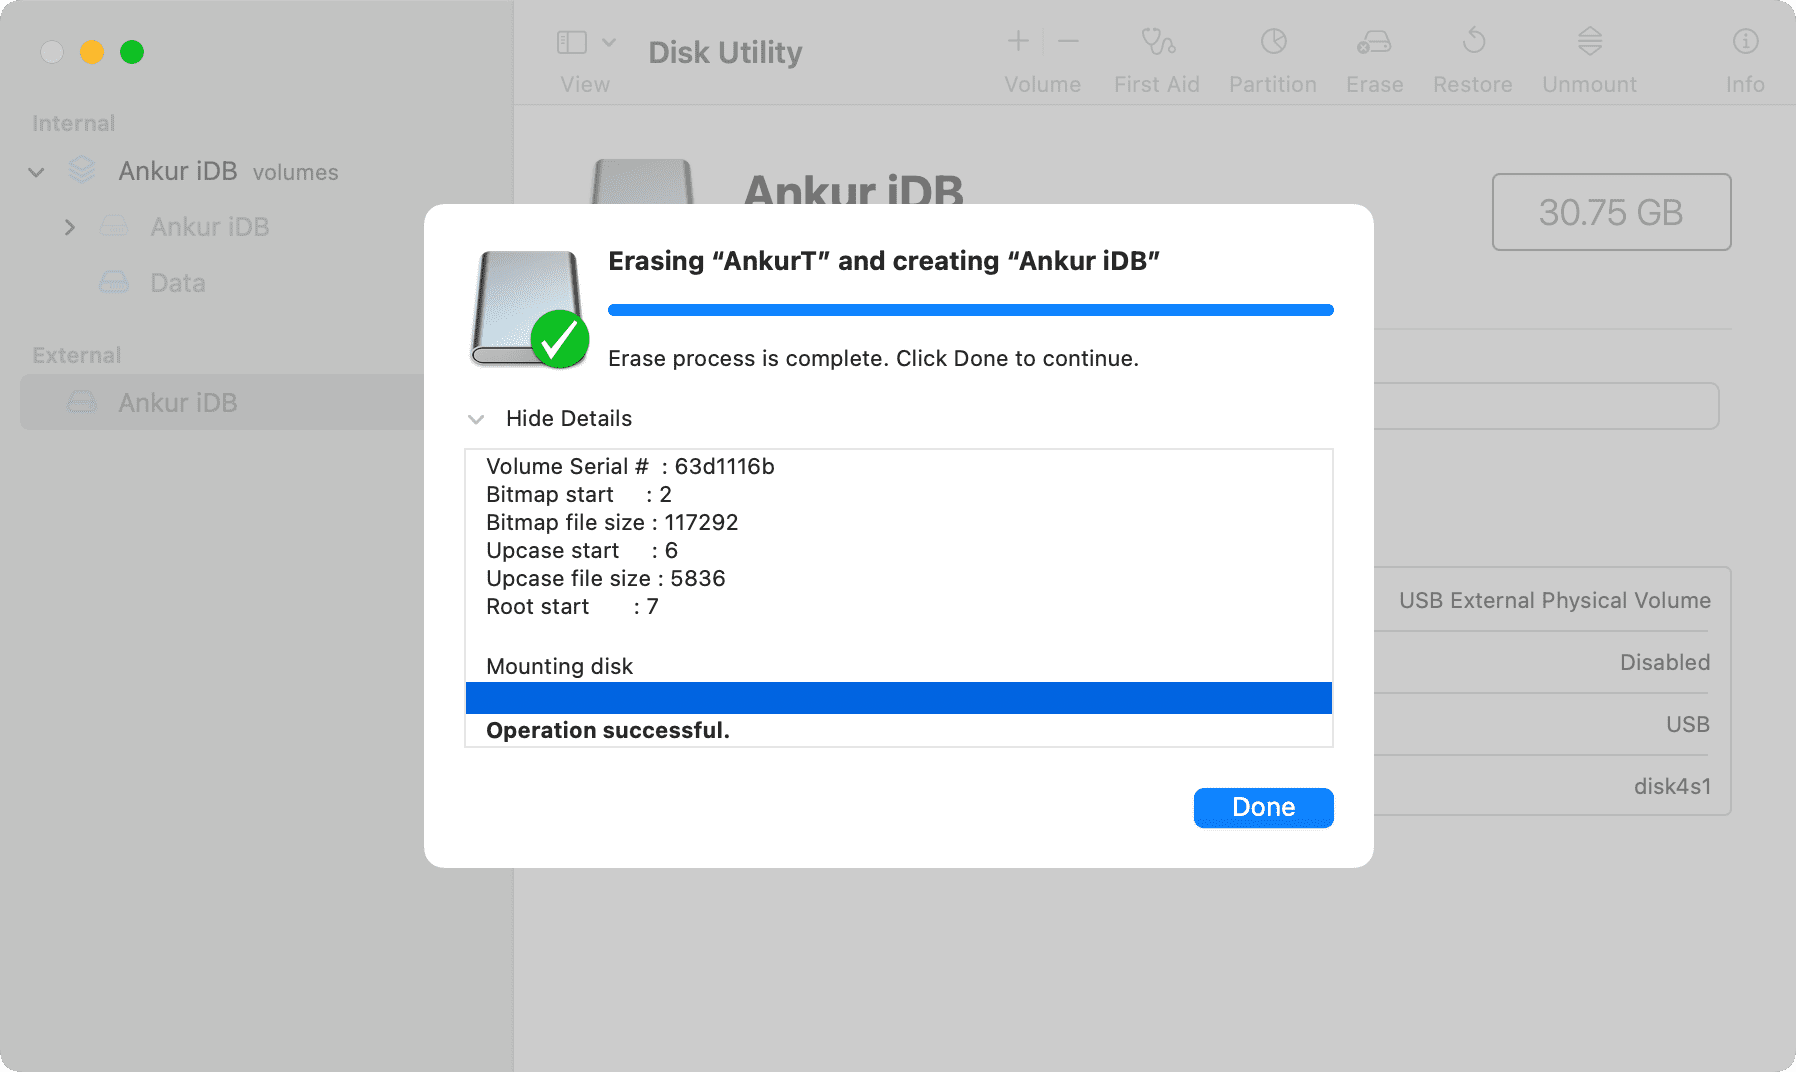 Disk Utility has finished formatting external drive